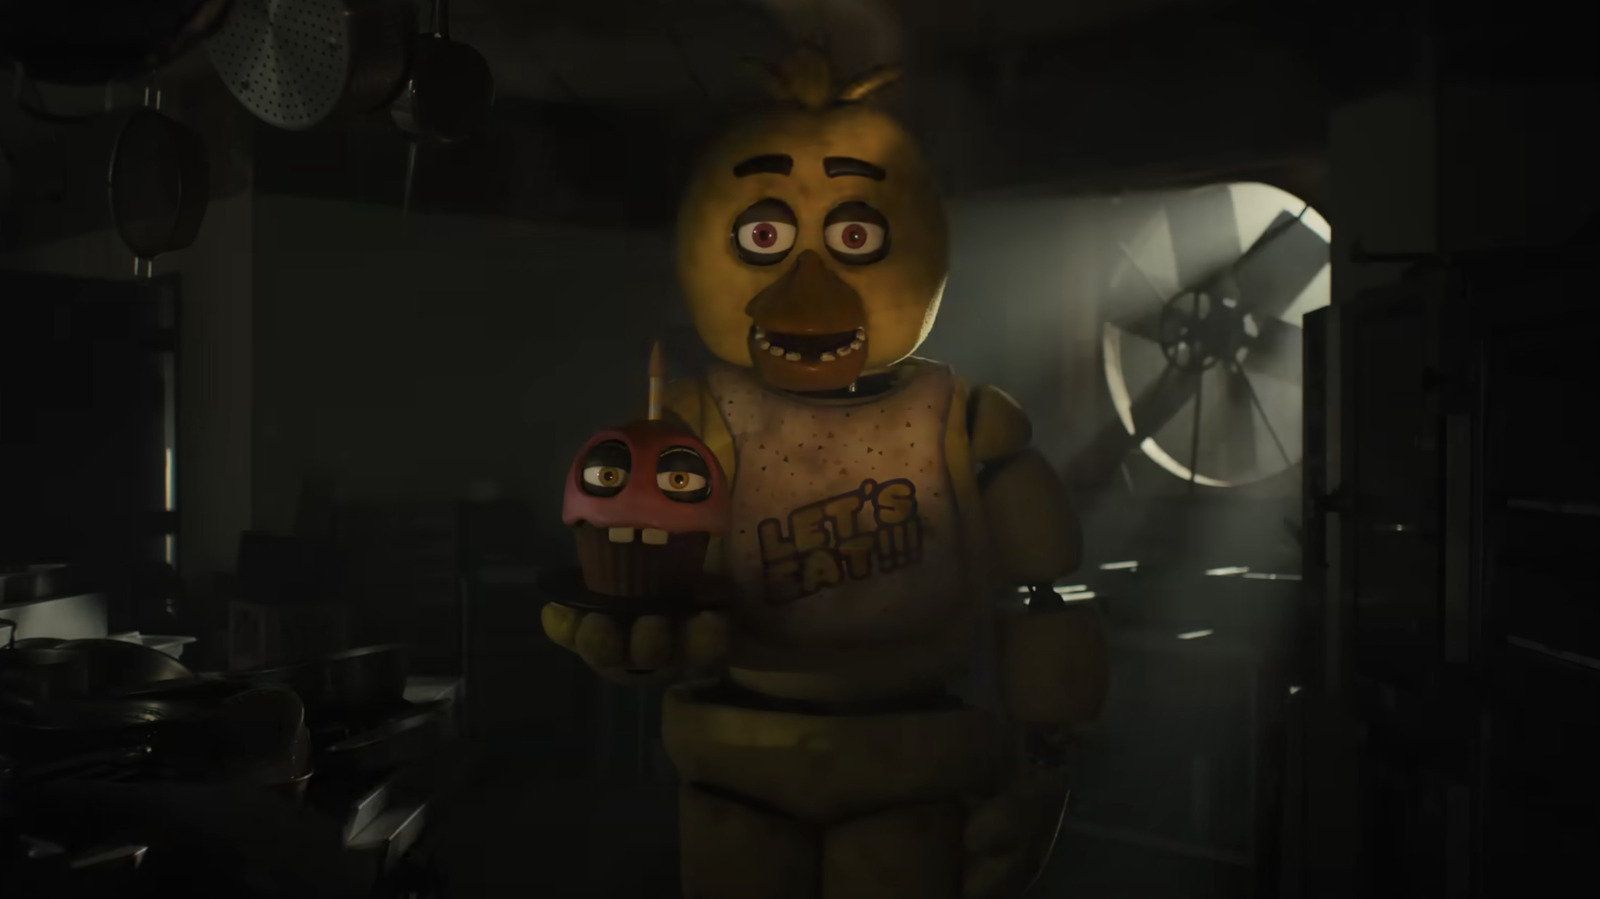 https://www.slashfilm.com/img/gallery/the-five-nights-at-freddys-movie-is-borrowing-a-cool-element-from-the-fourth-game/l-intro-1693508371.jpg